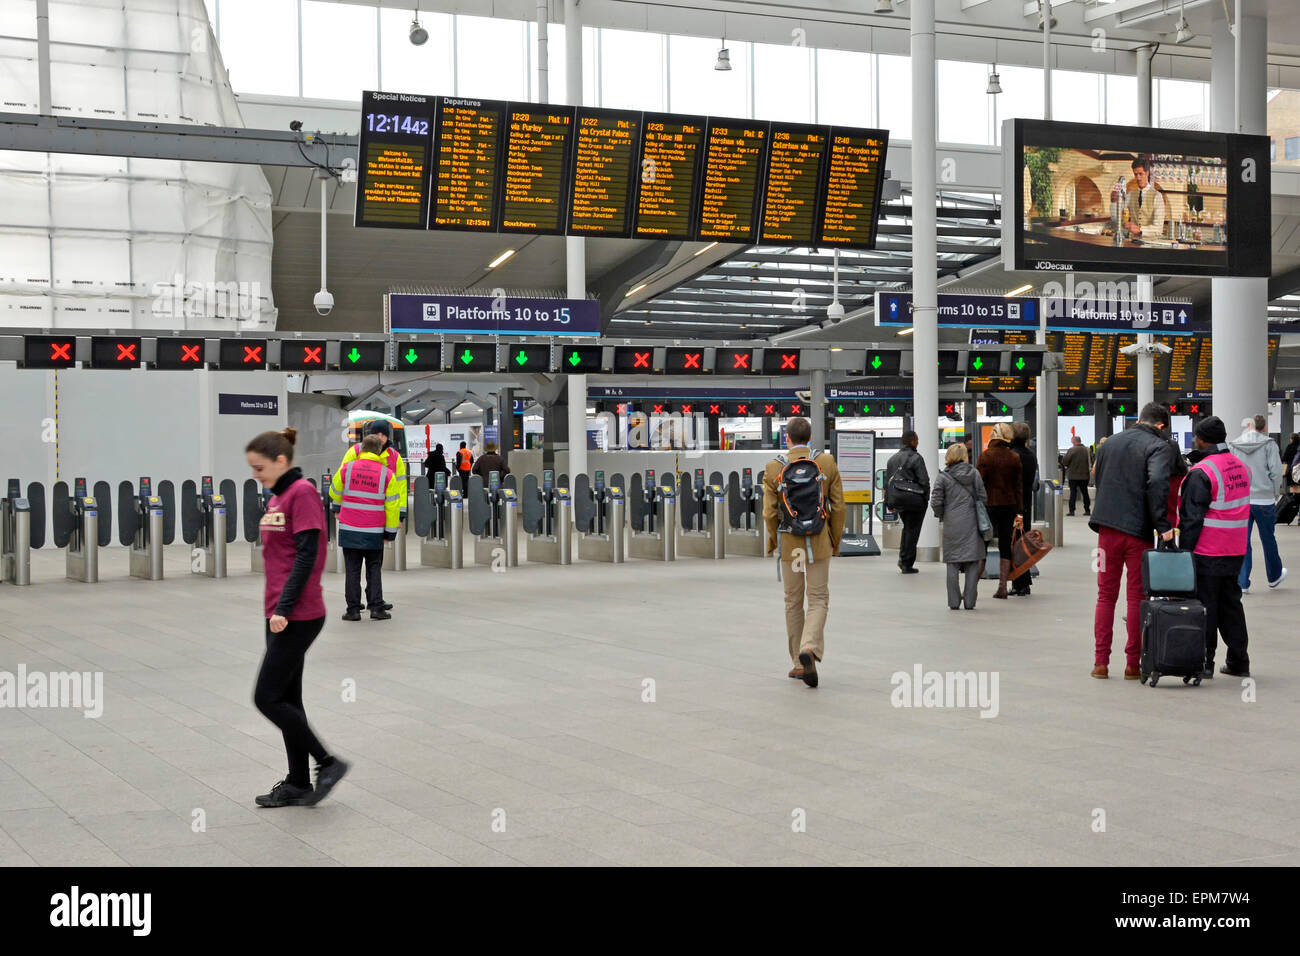 London Bridge station departure board and train ticket barrier seen after completion of part of the major upgrade project London England UK Stock Photo